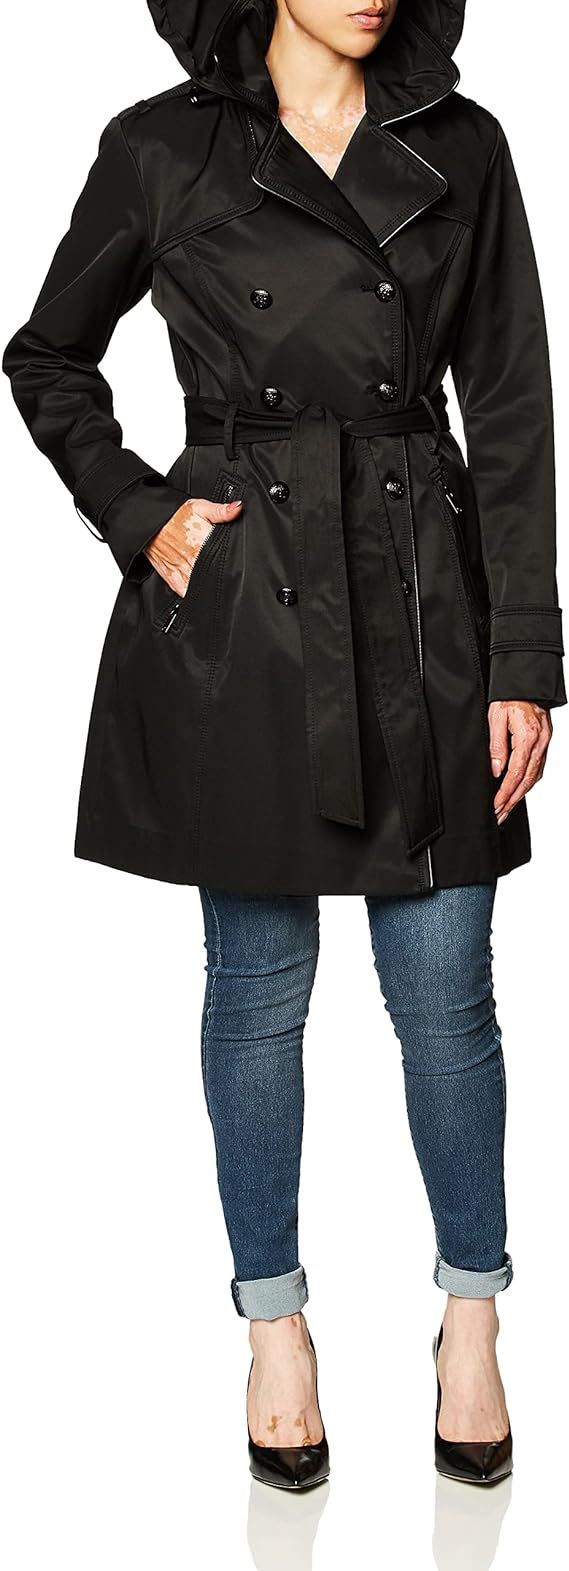 GUESS Women's Double Breasted Trenchcoat       Send to Logie | Amazon (US)